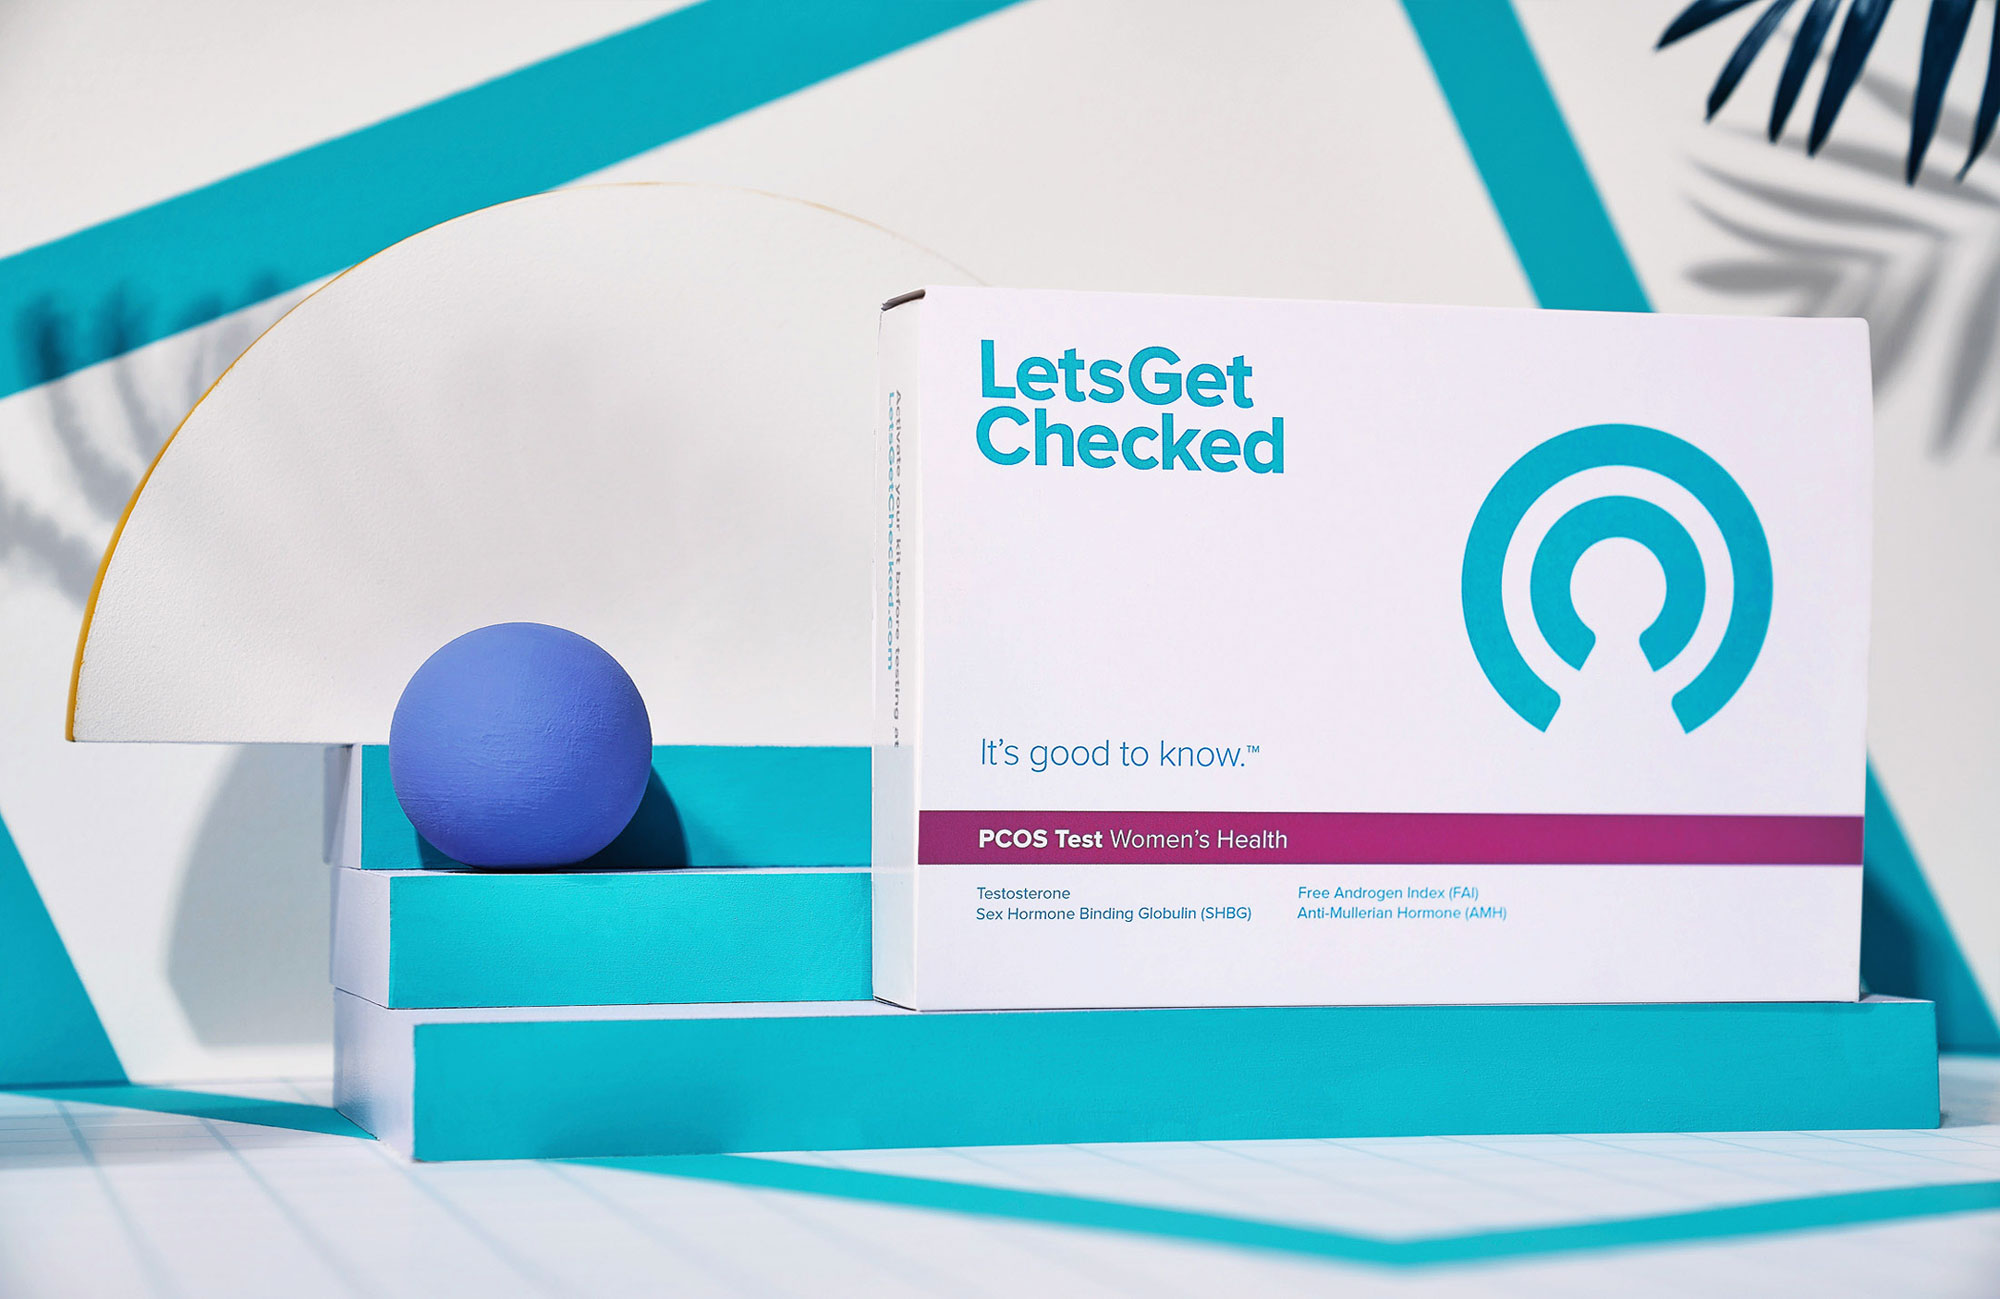 Let's Get Checked Play Nice Studio Product Photography Dublin